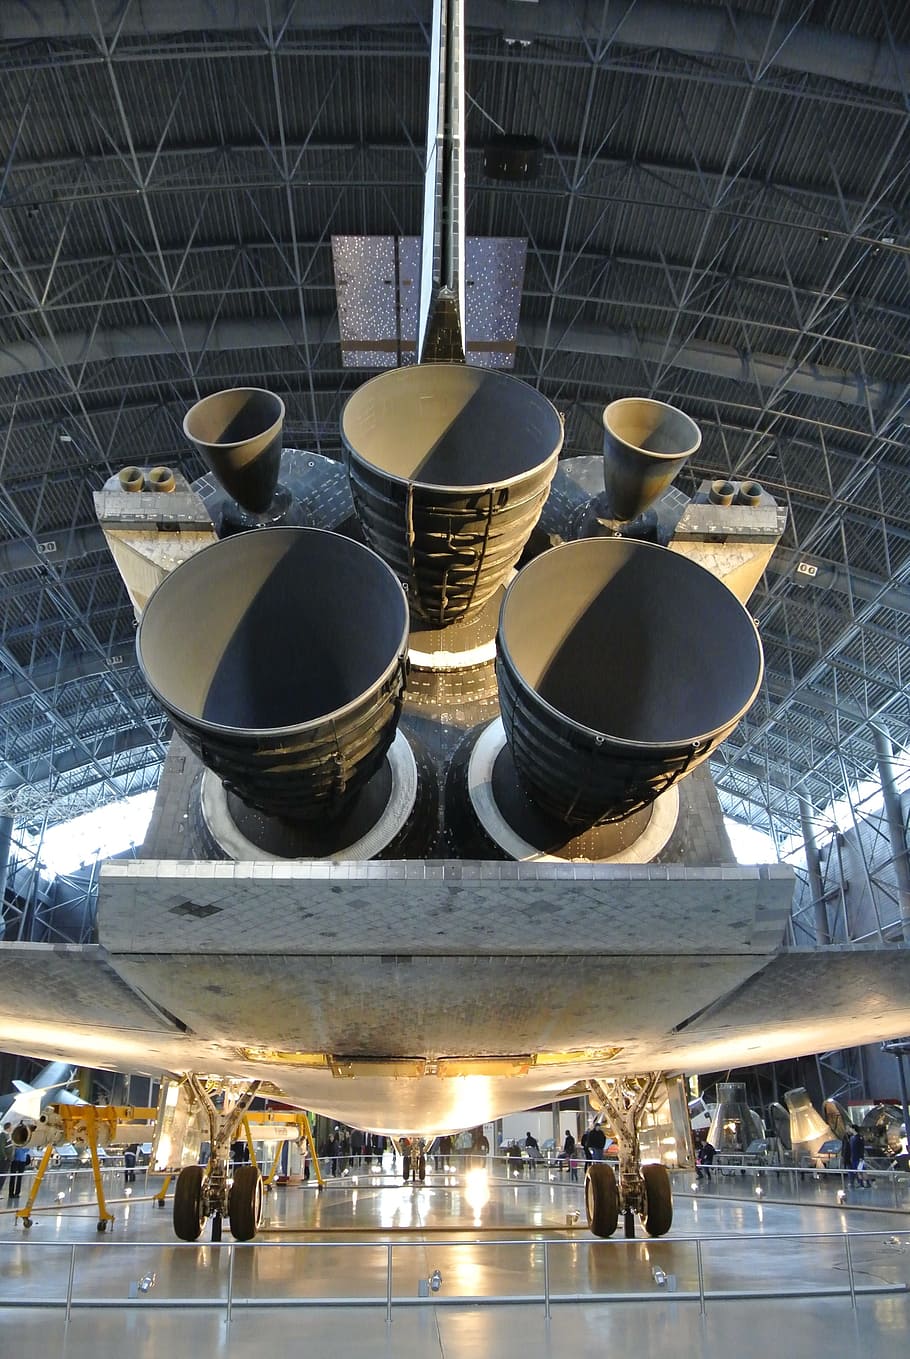 Boosters, Shuttle, Space, Spaceship, technology, rocket, launch, spacecraft, flight, exploration